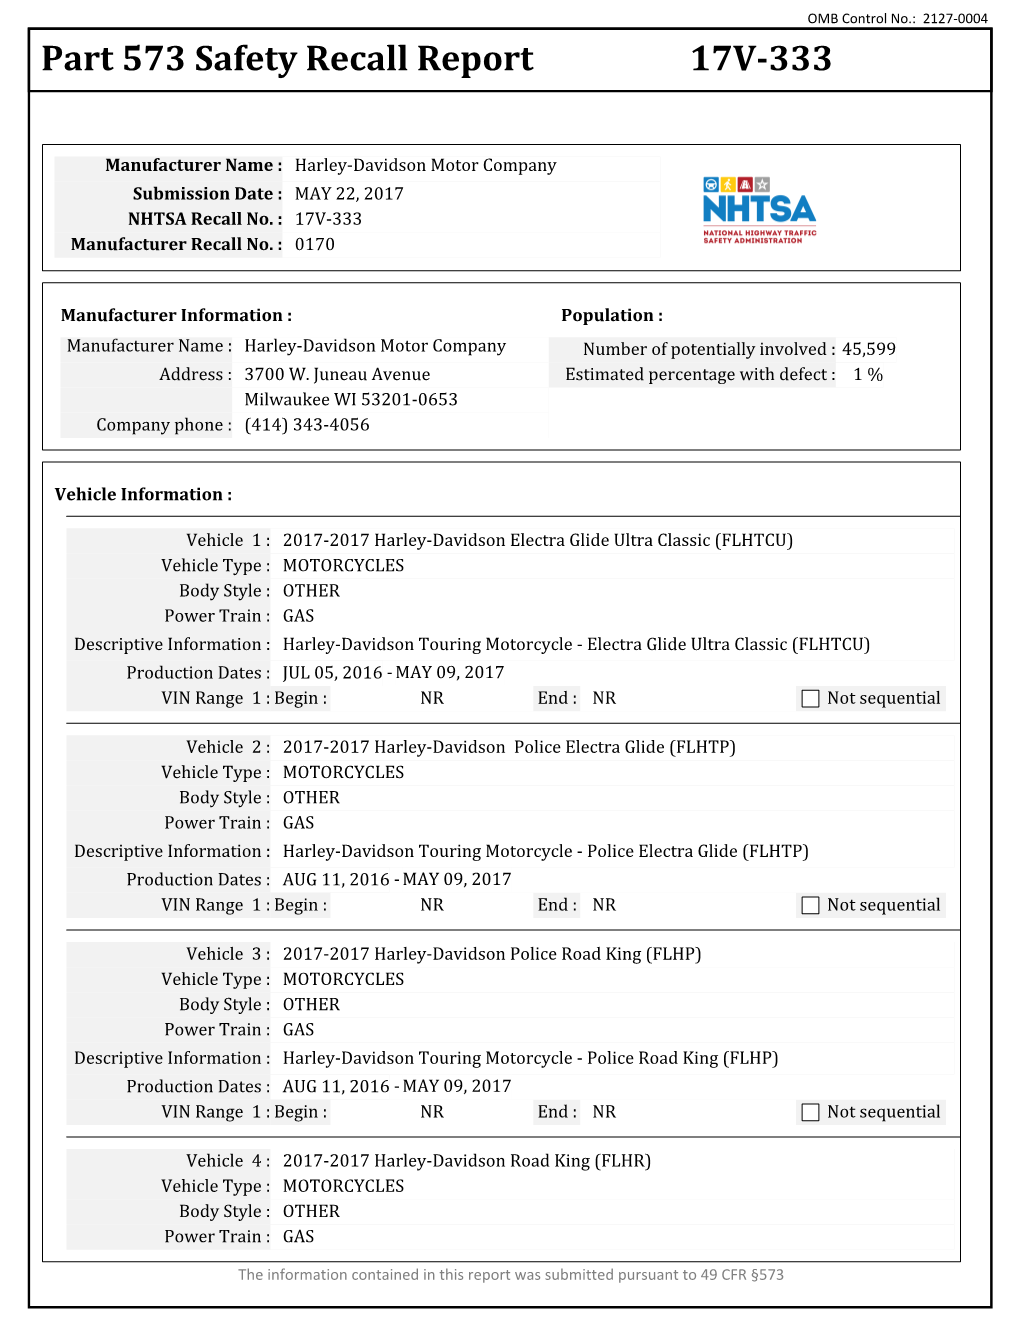 Part 573 Safety Recall Report 17V-333